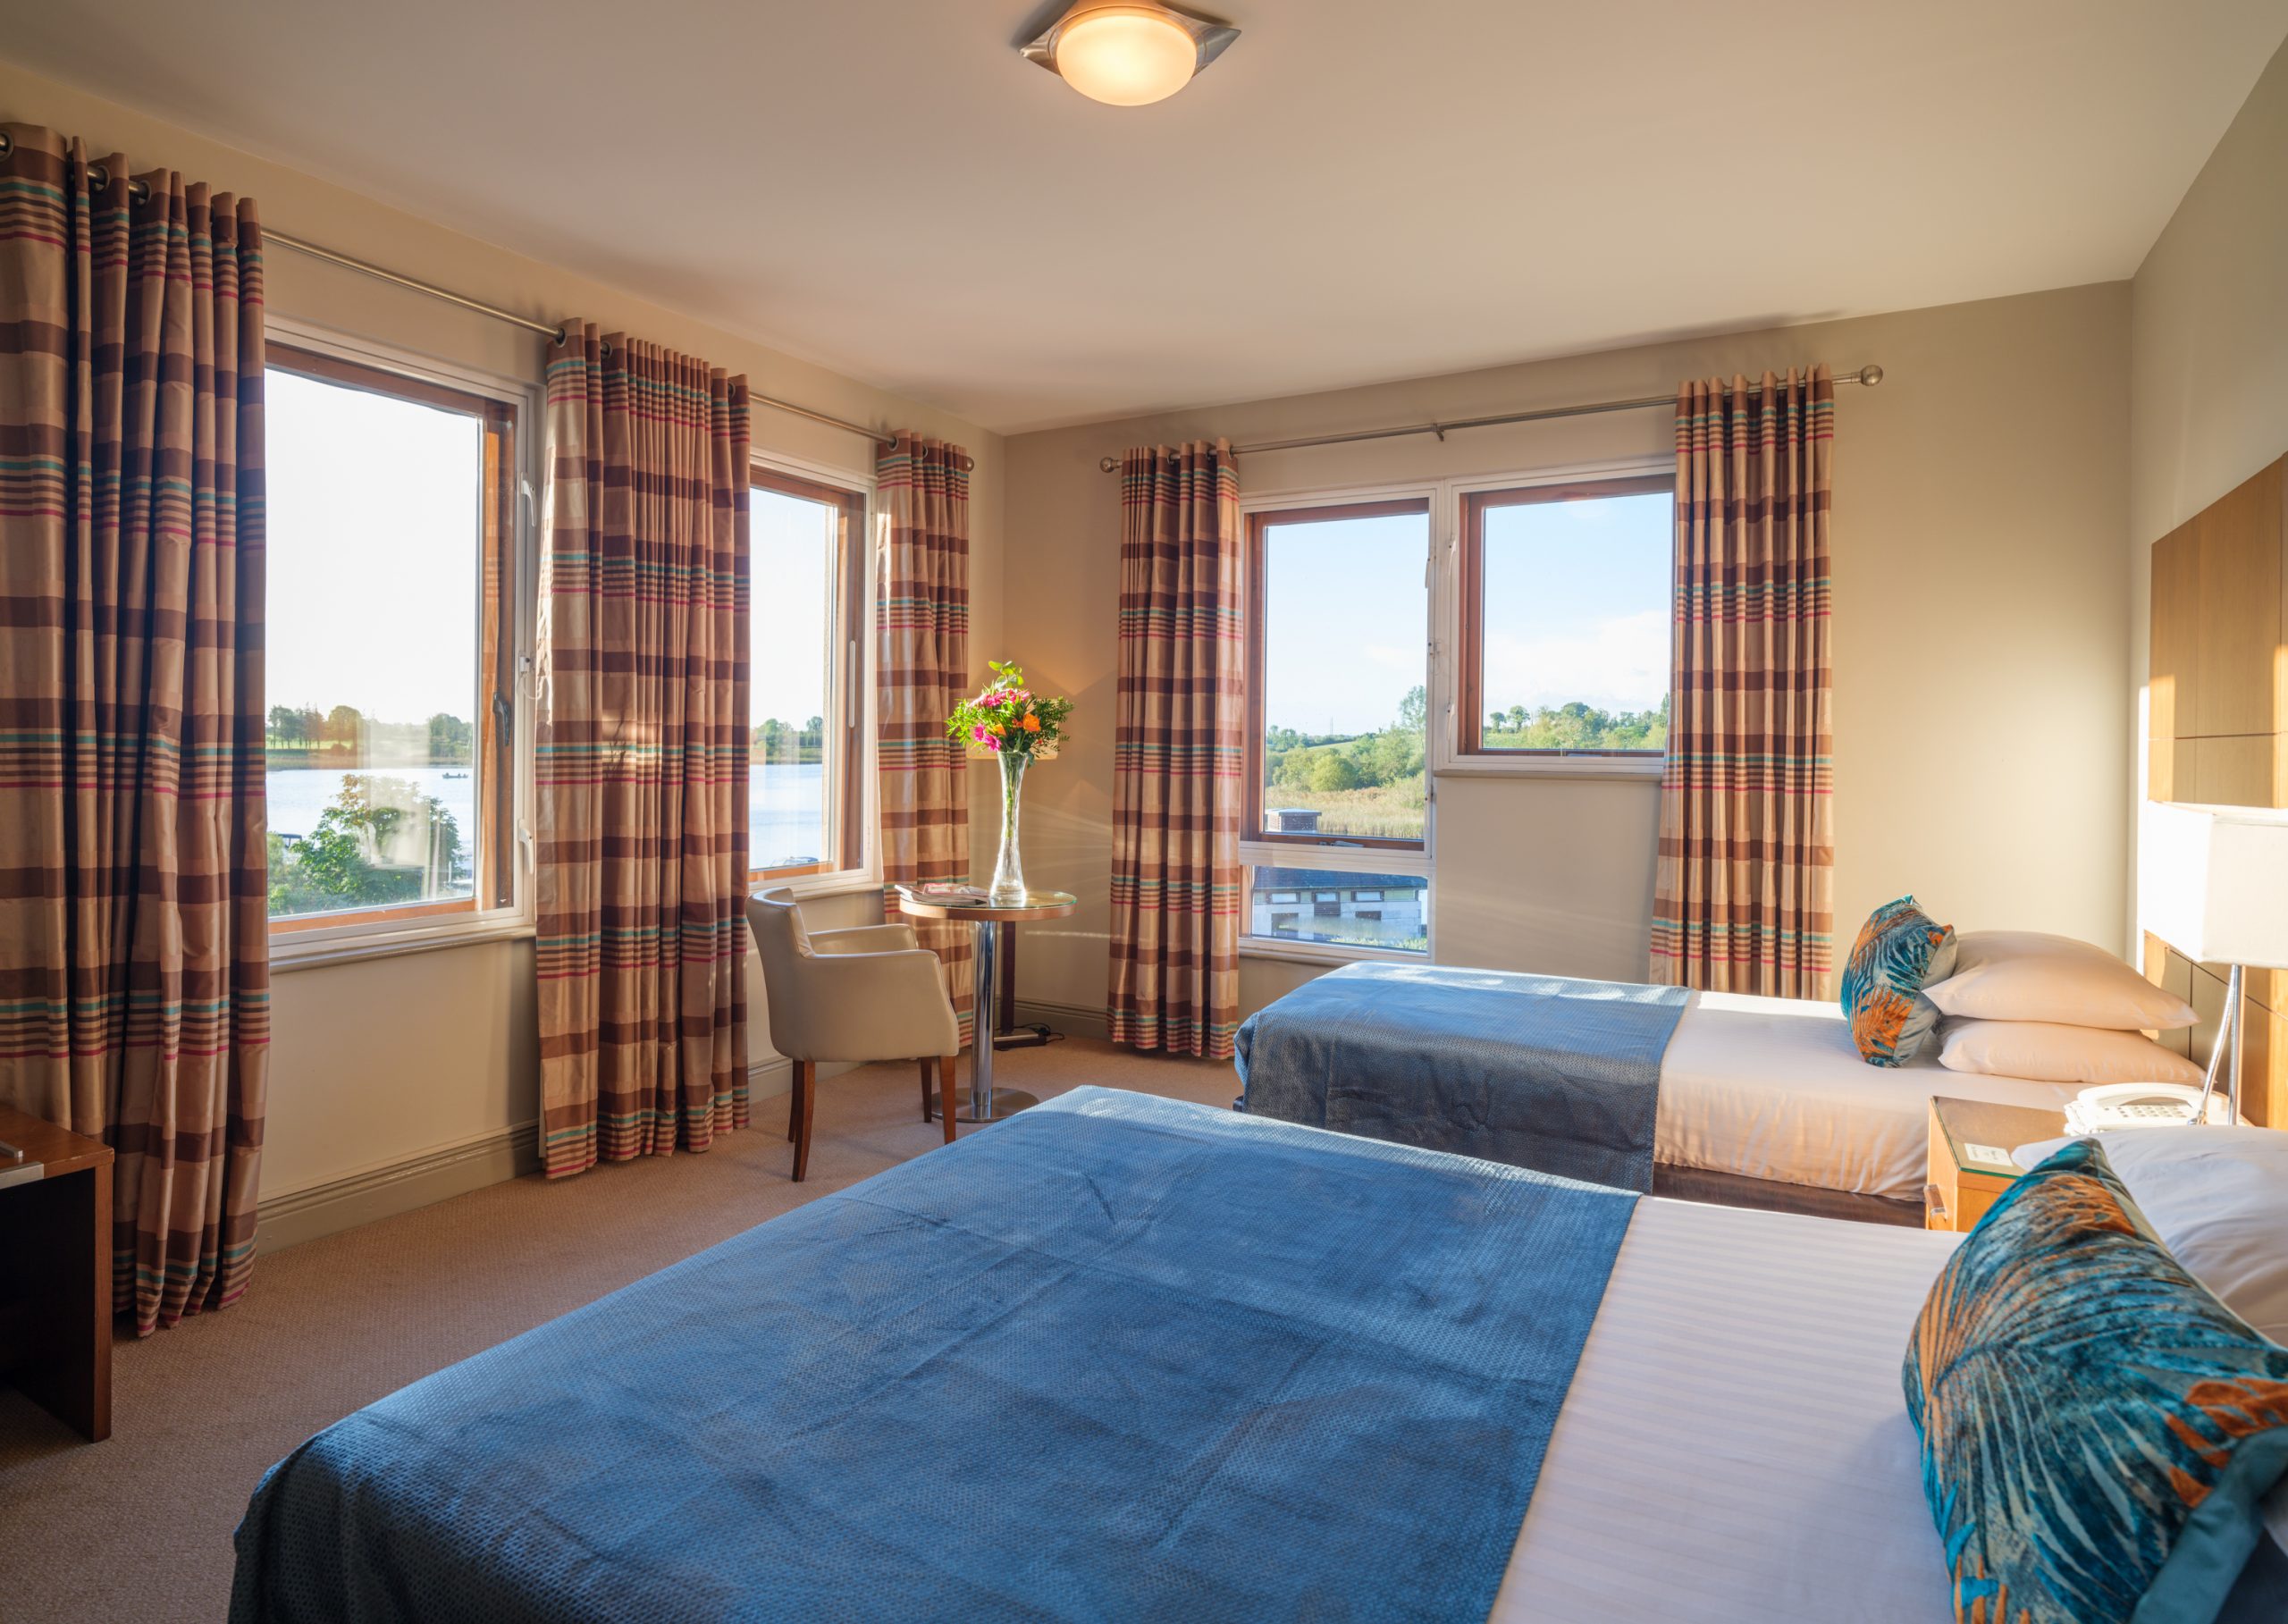 Shannon View Room at Cryan's Hotel Carrick on Shannon